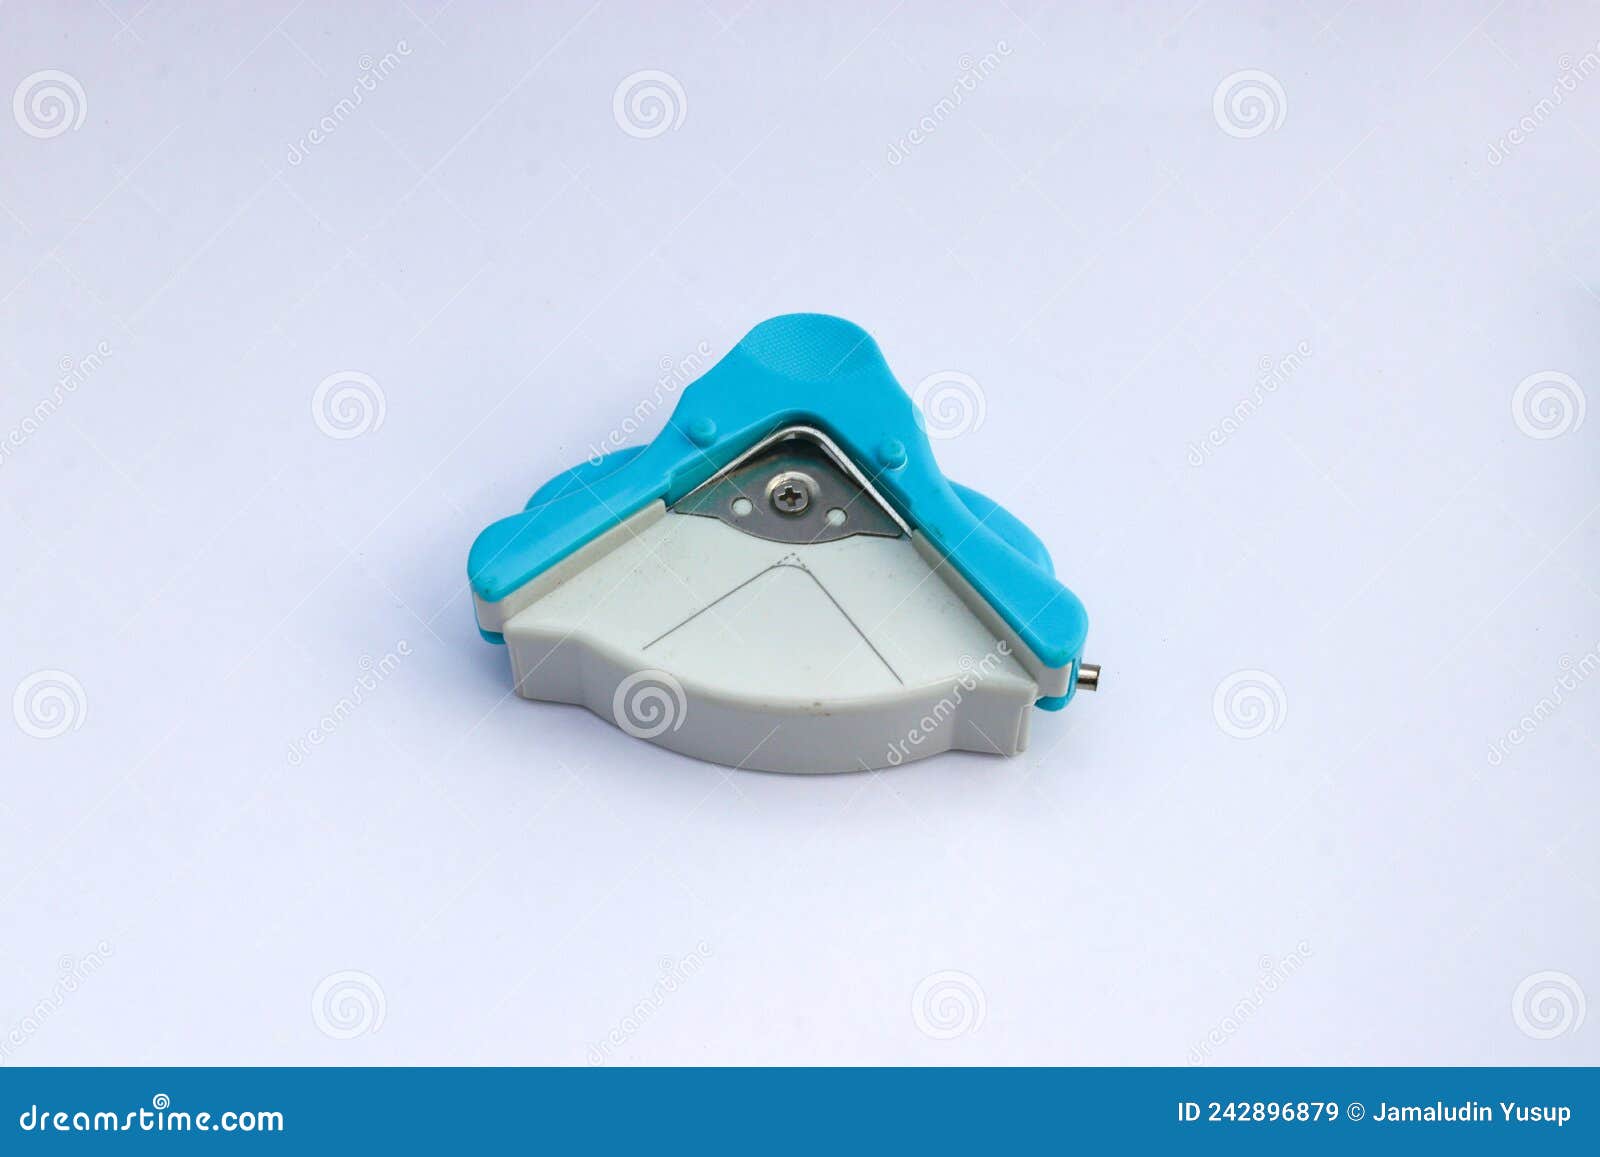 Blue and White Corner Cutter Rounder Punch for Cutting Card Photo